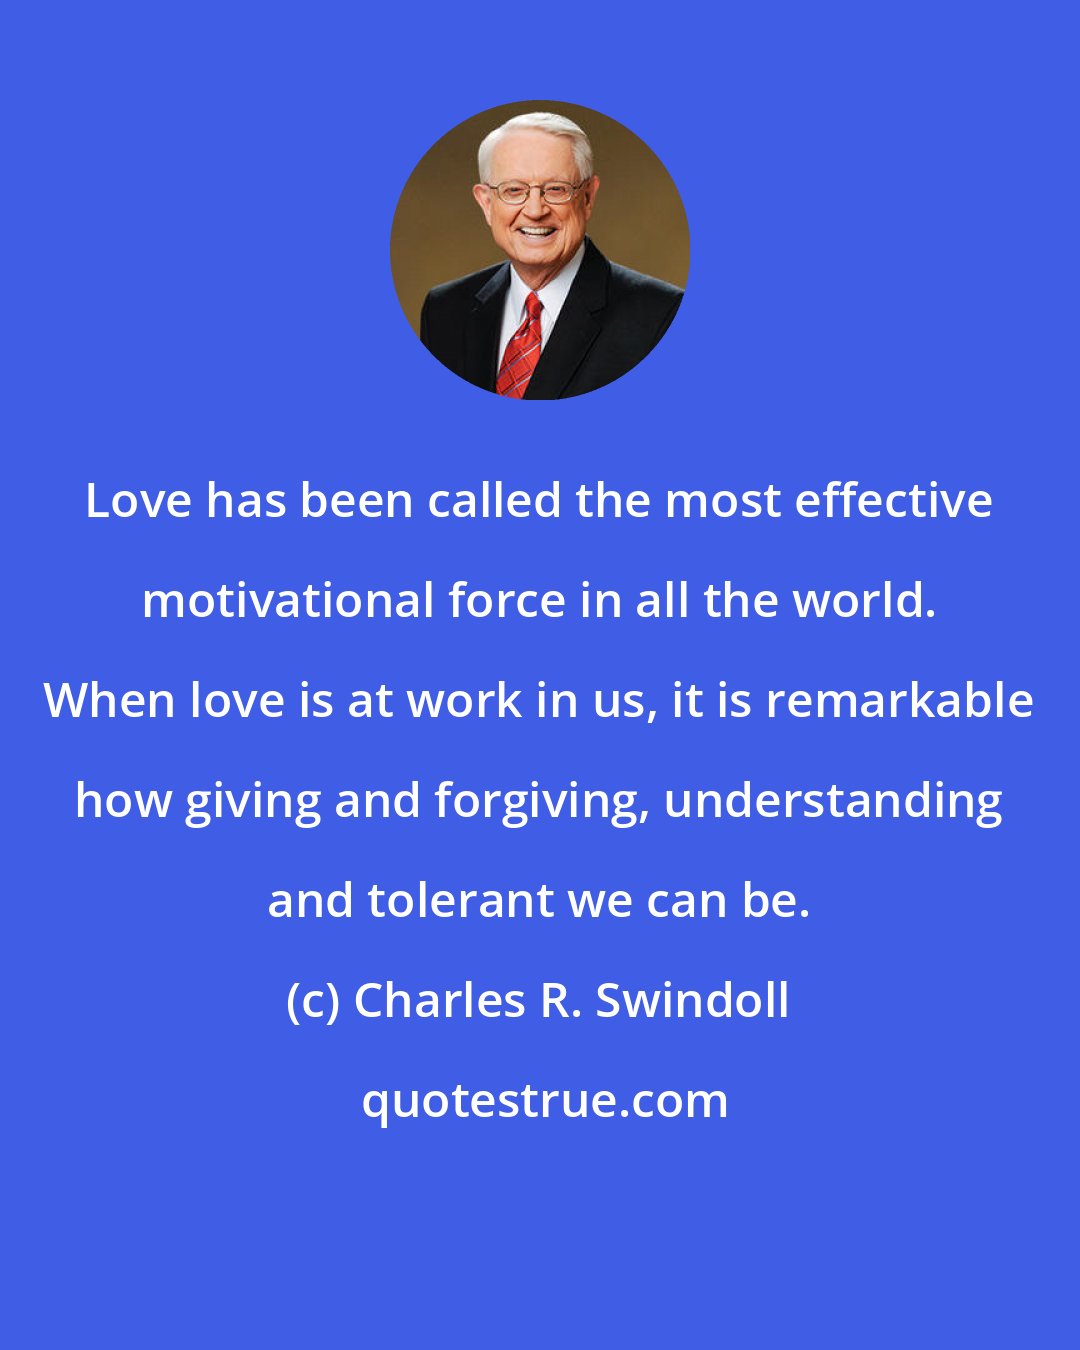 Charles R. Swindoll: Love has been called the most effective motivational force in all the world. When love is at work in us, it is remarkable how giving and forgiving, understanding and tolerant we can be.